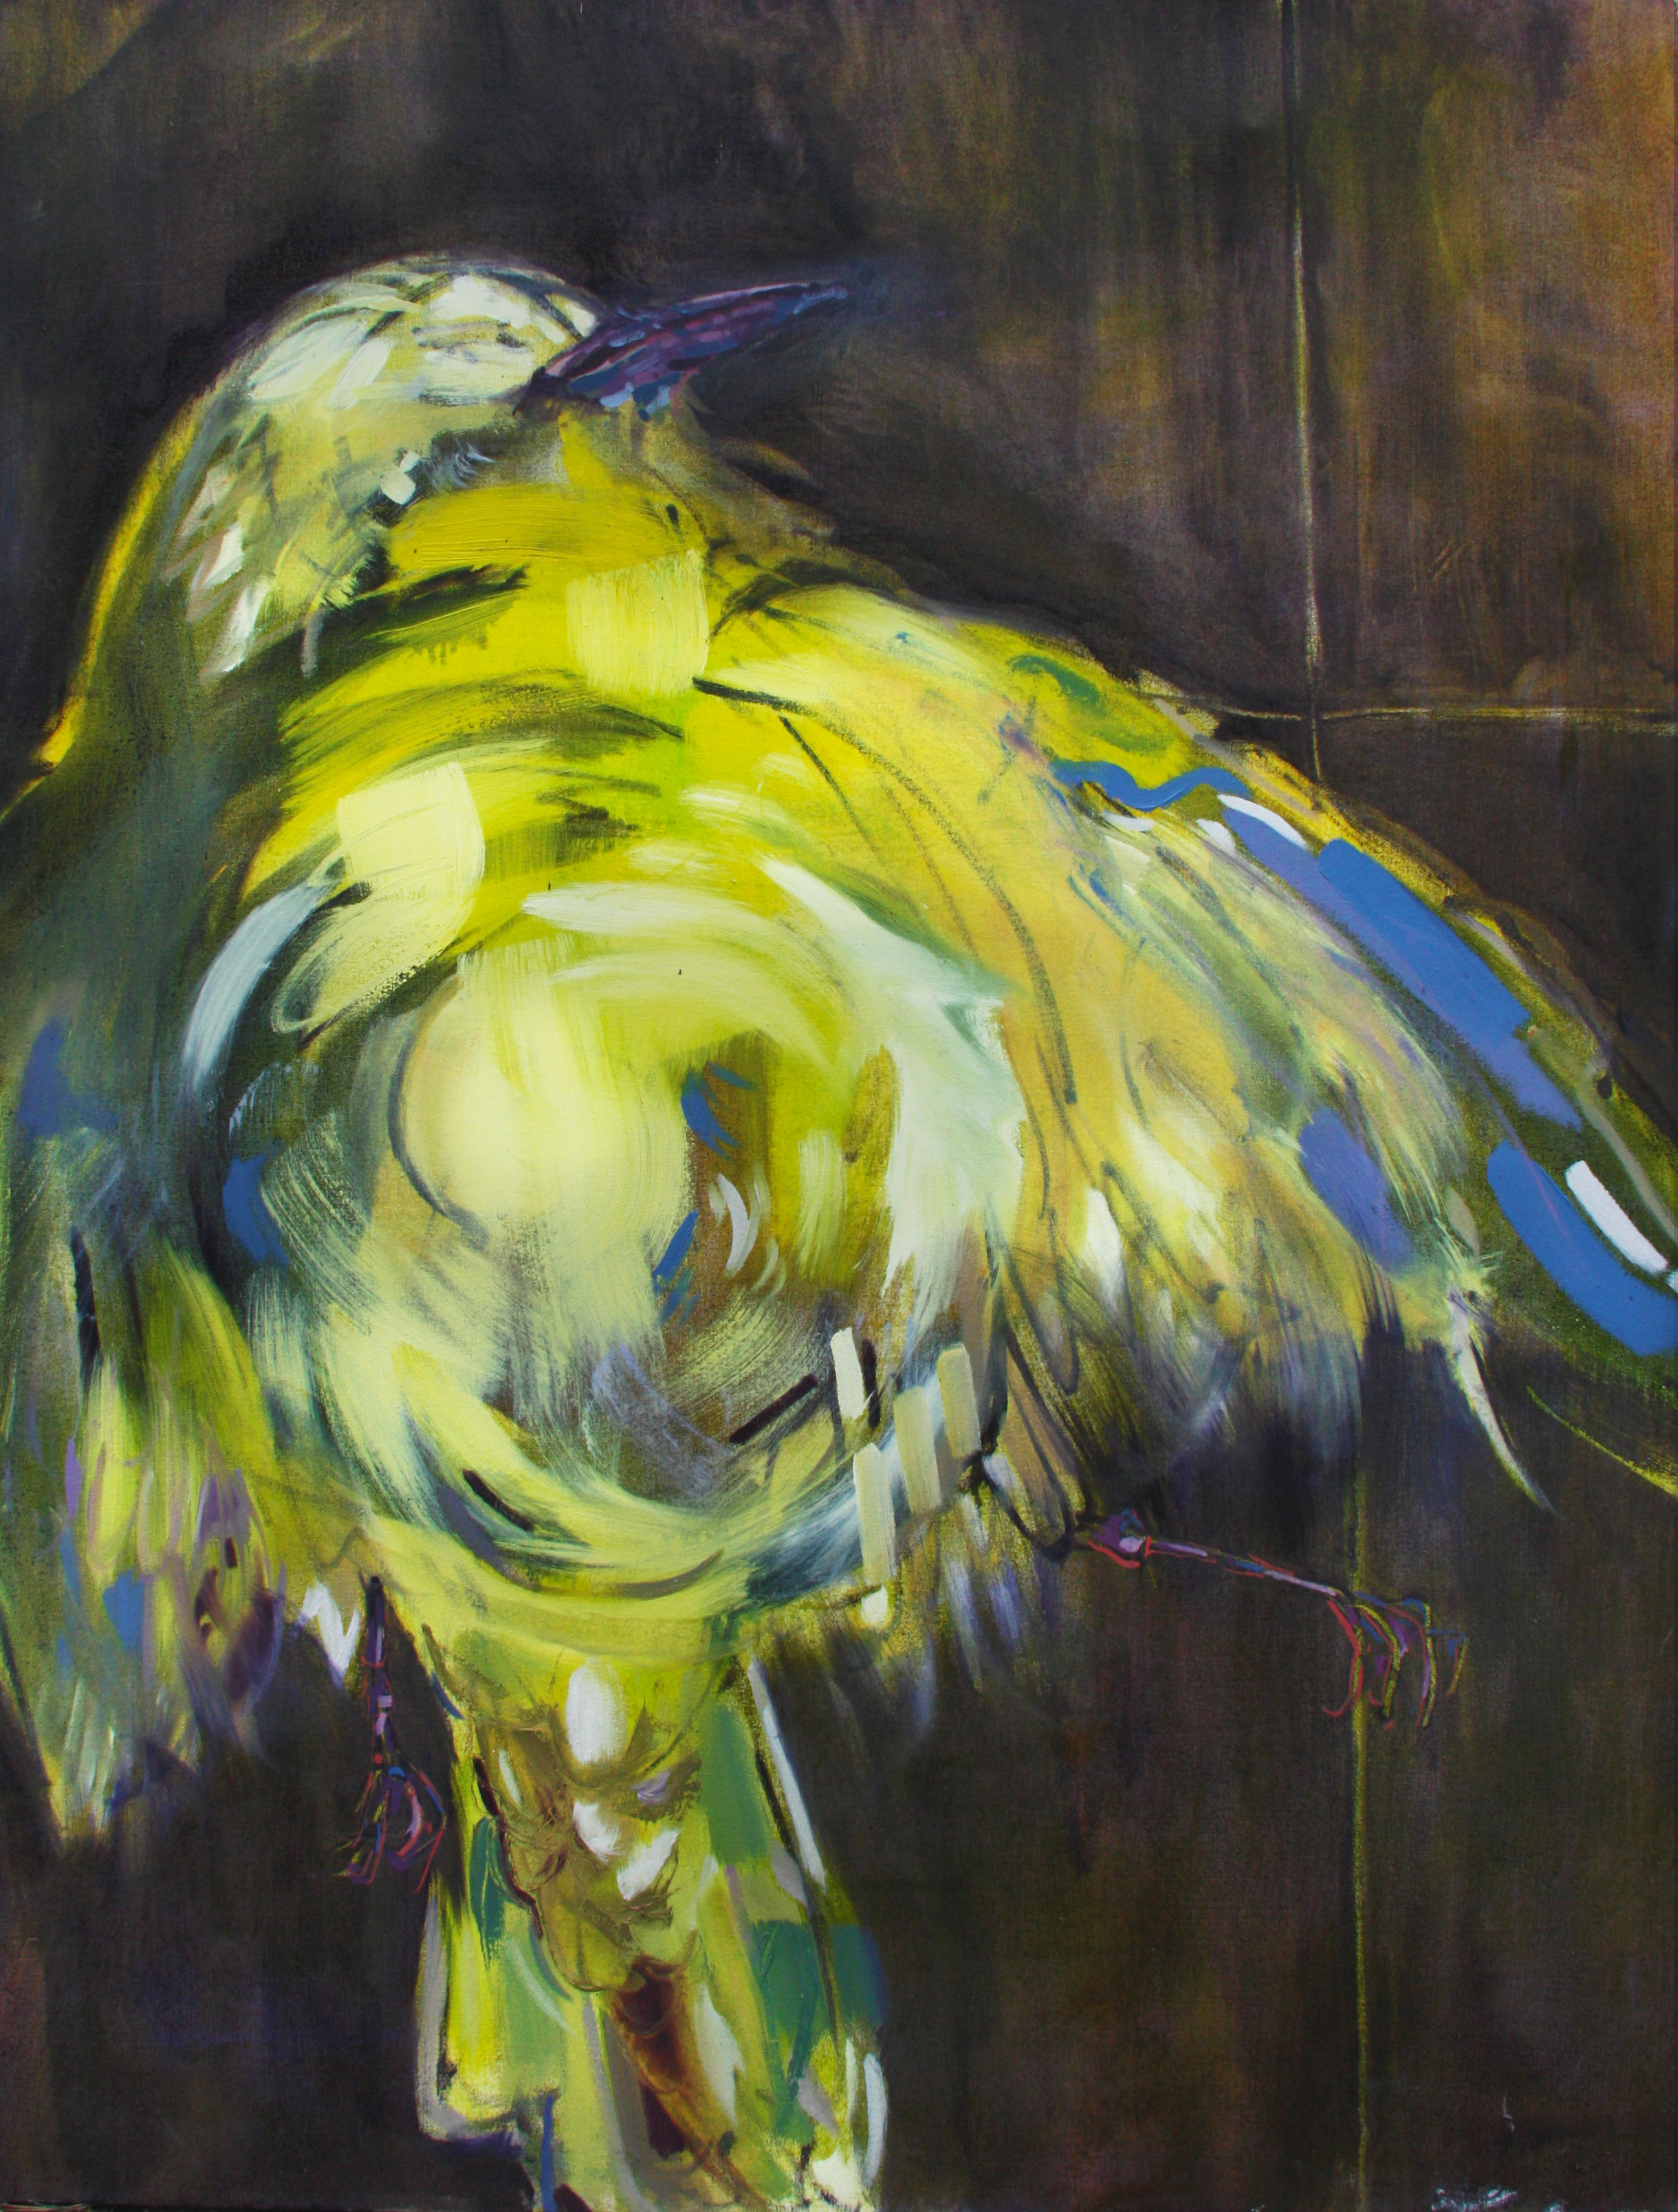   Yellow Finch  (2012) oil on canvas 48" x 36"    